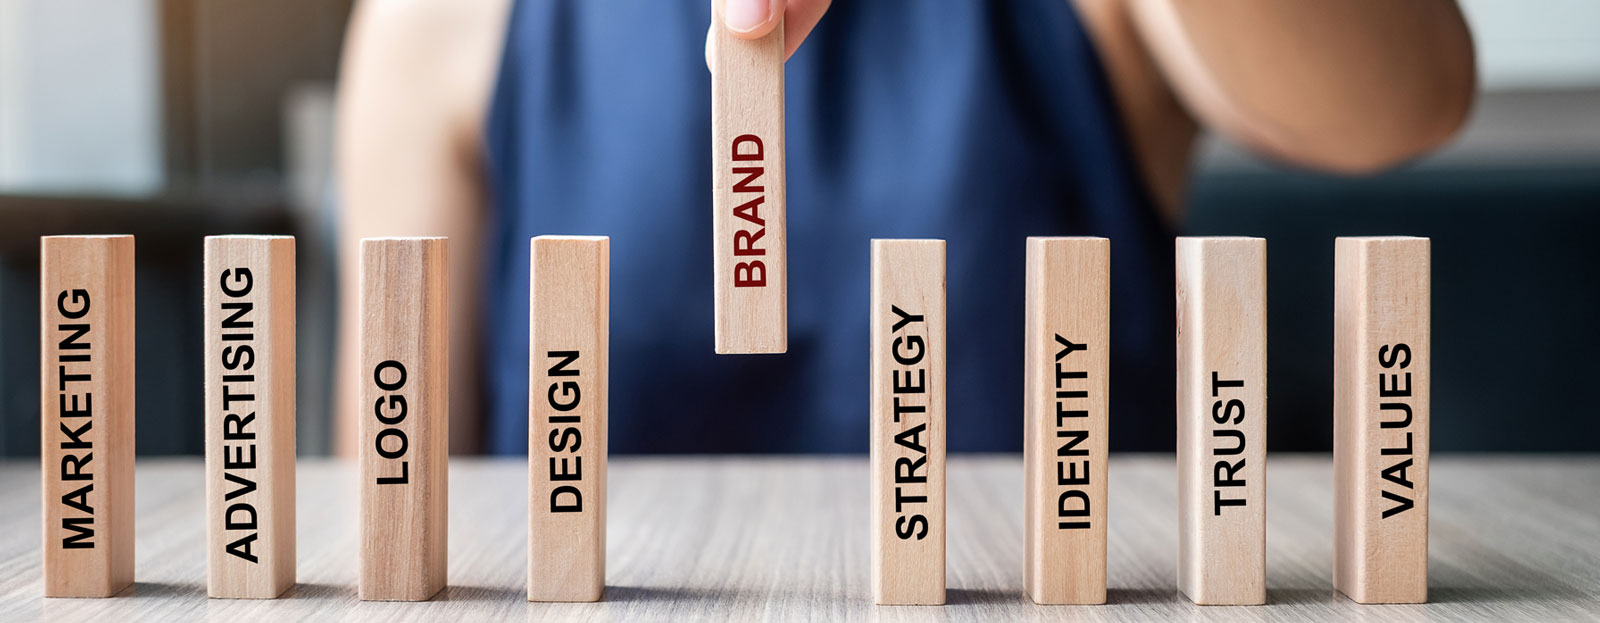 Increasing your company’s brand reputation   